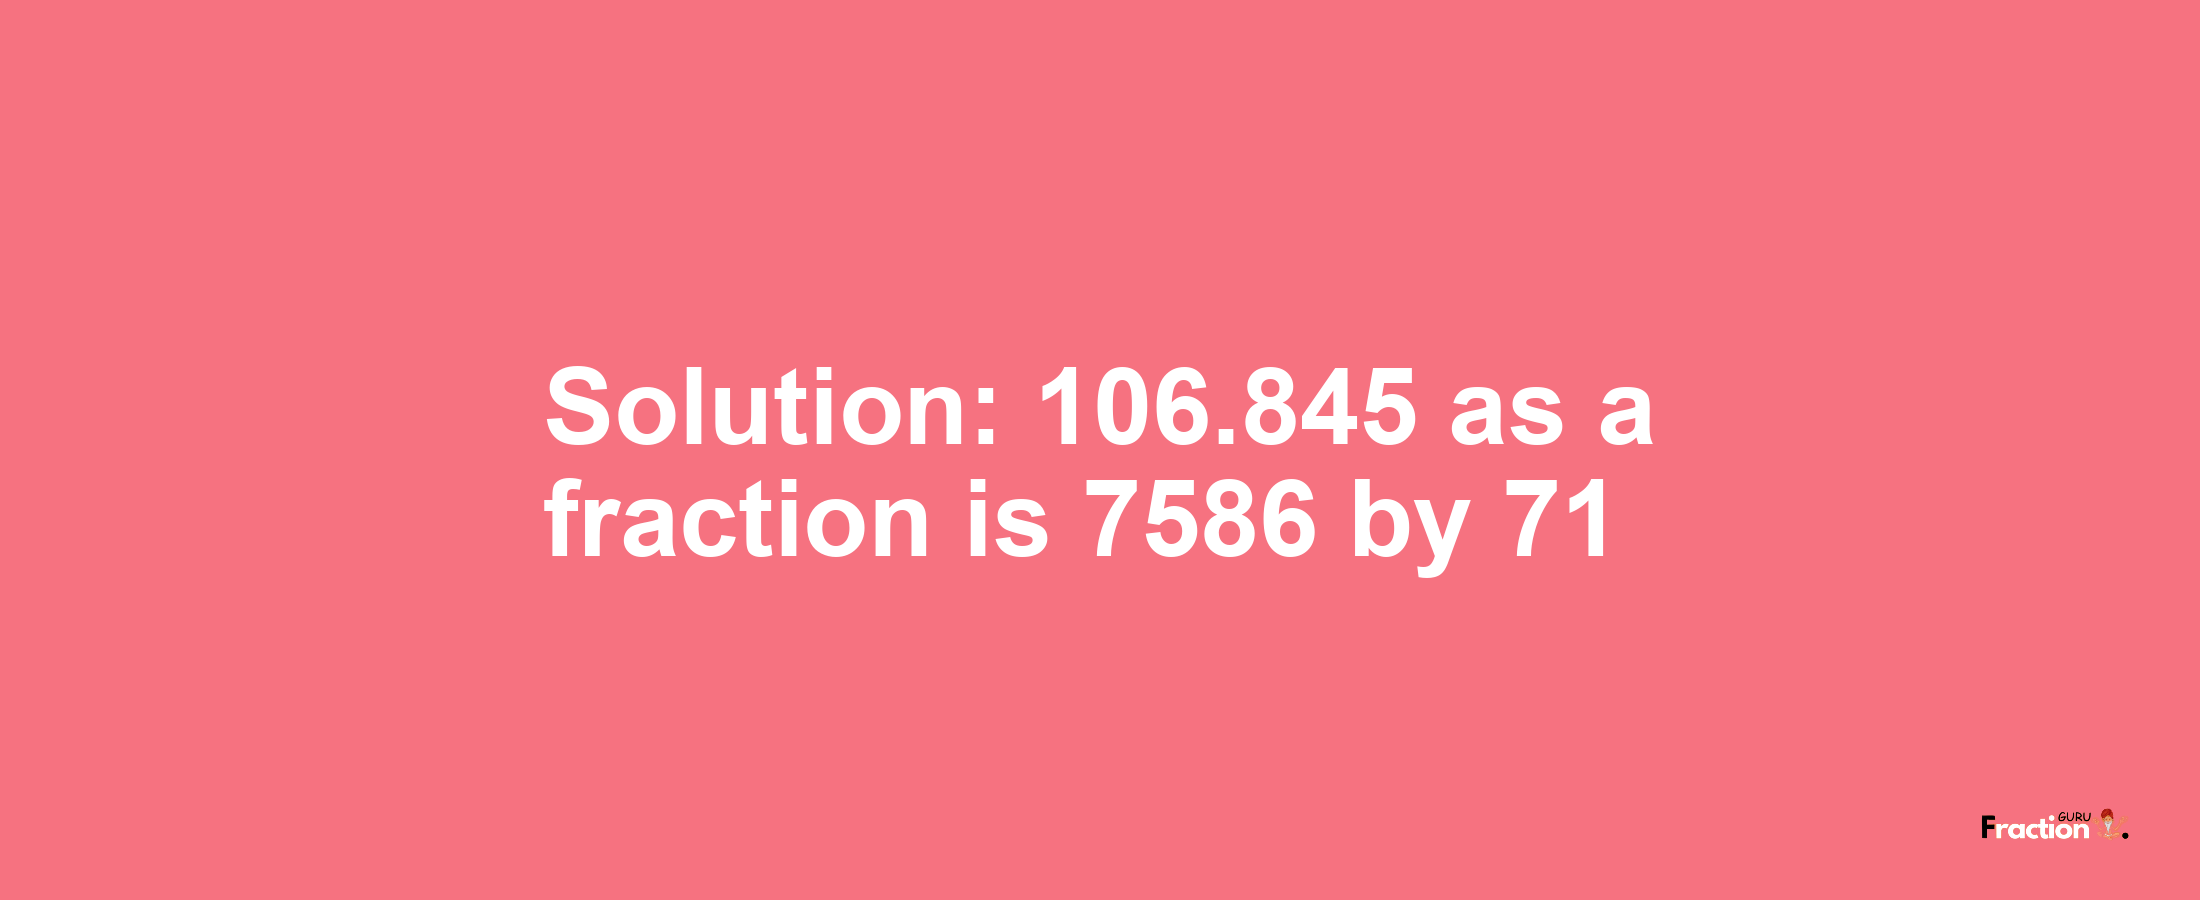 Solution:106.845 as a fraction is 7586/71